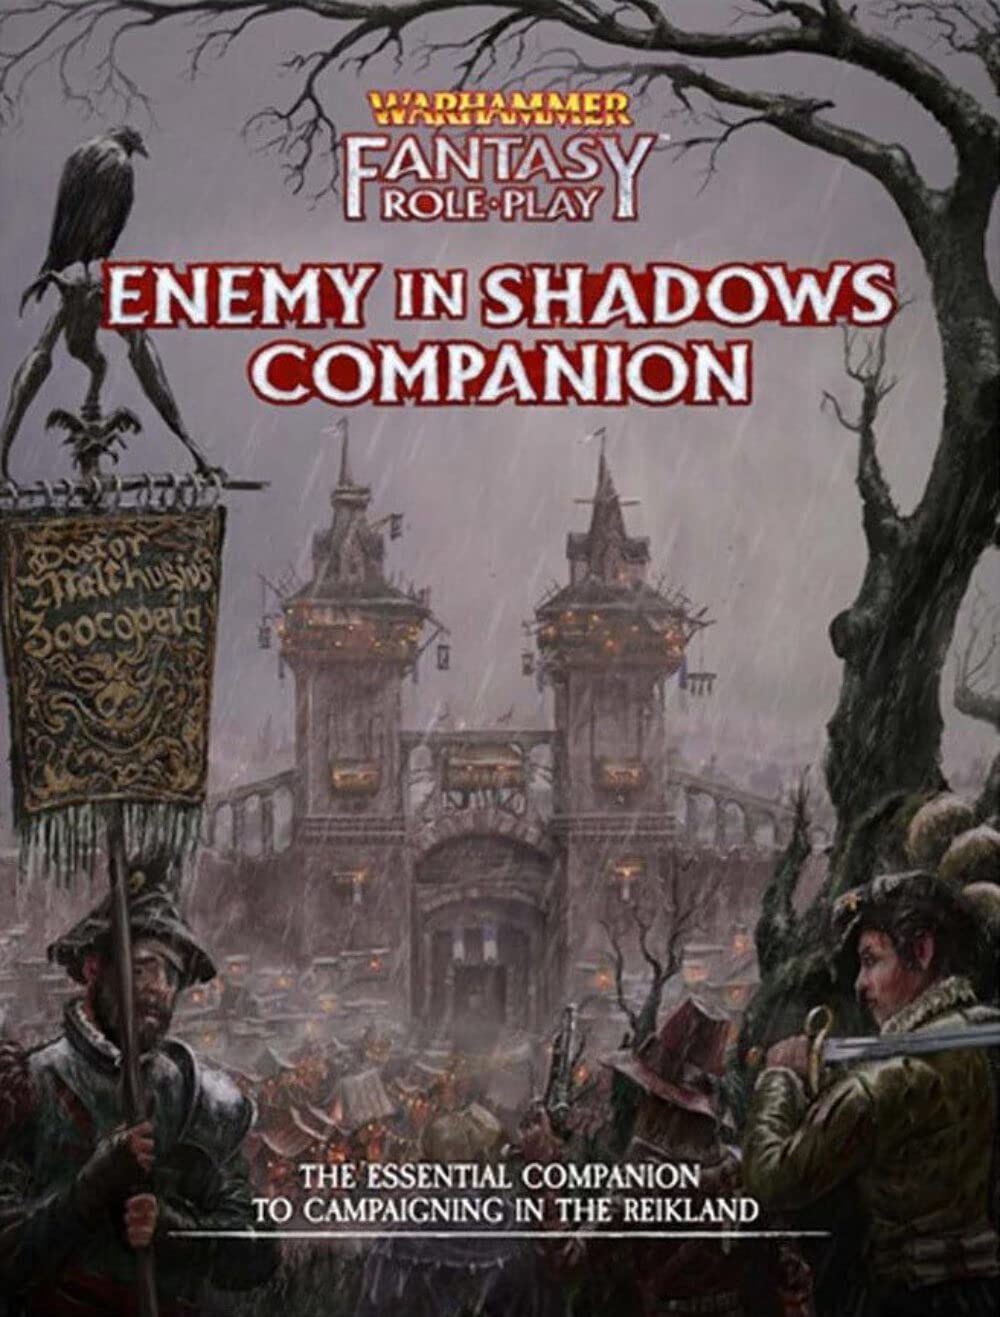 Cubicle 7 Role Playing Games Warhammer Fantasy RPG: Enemy Within - Vol. 1: Enemy in Shadows Companion